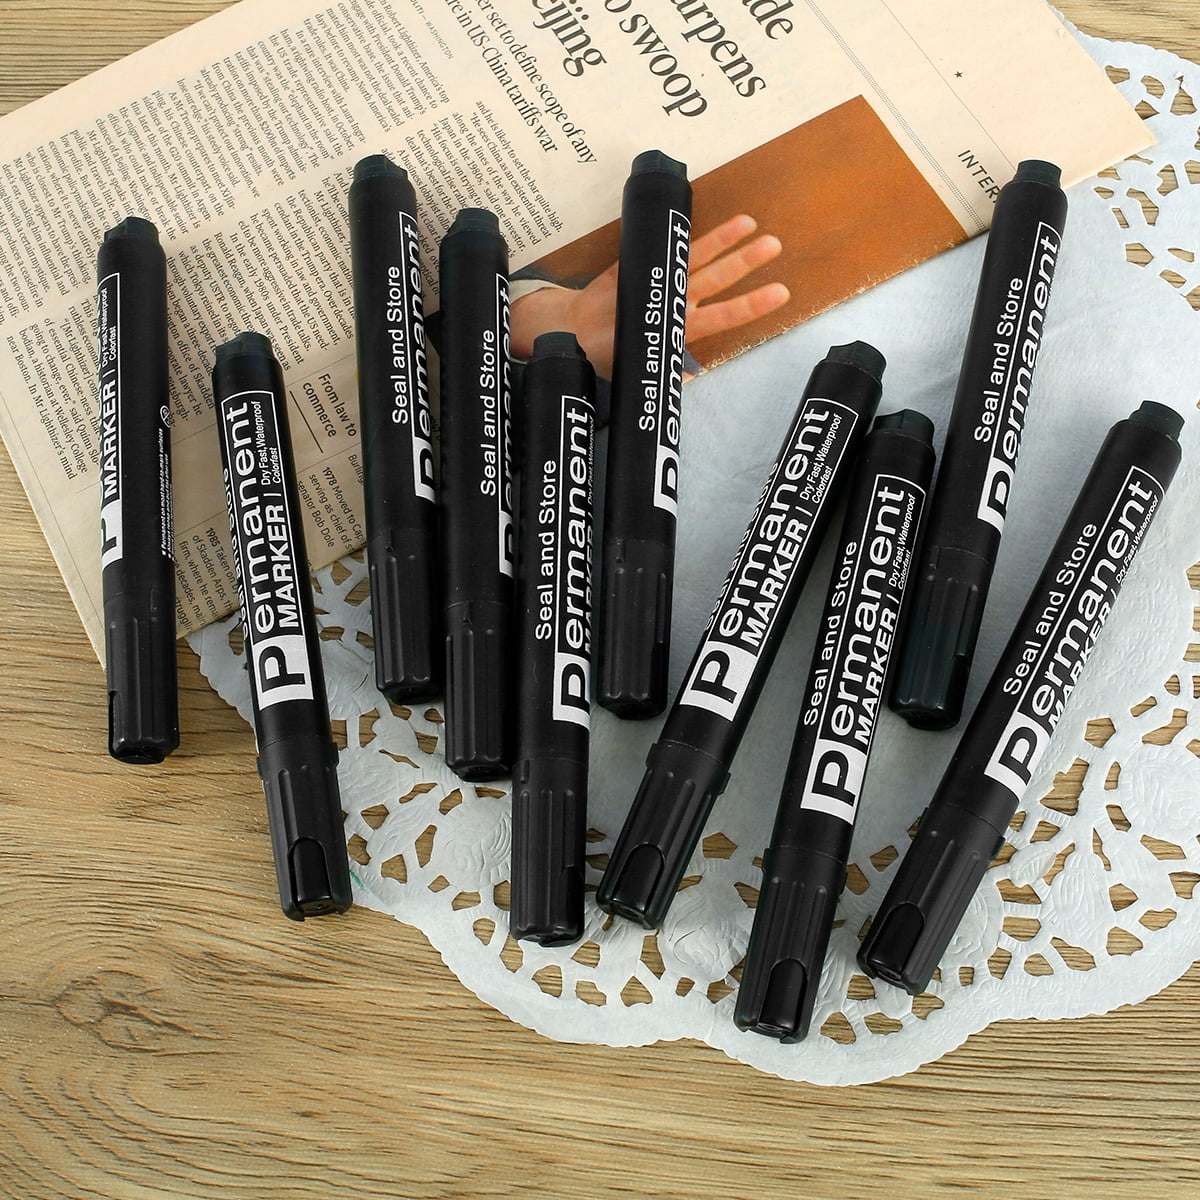 24 Tolsen Black Permanent Markers Quick Dry Non-Fading Waterproof Ink 2MM  Point